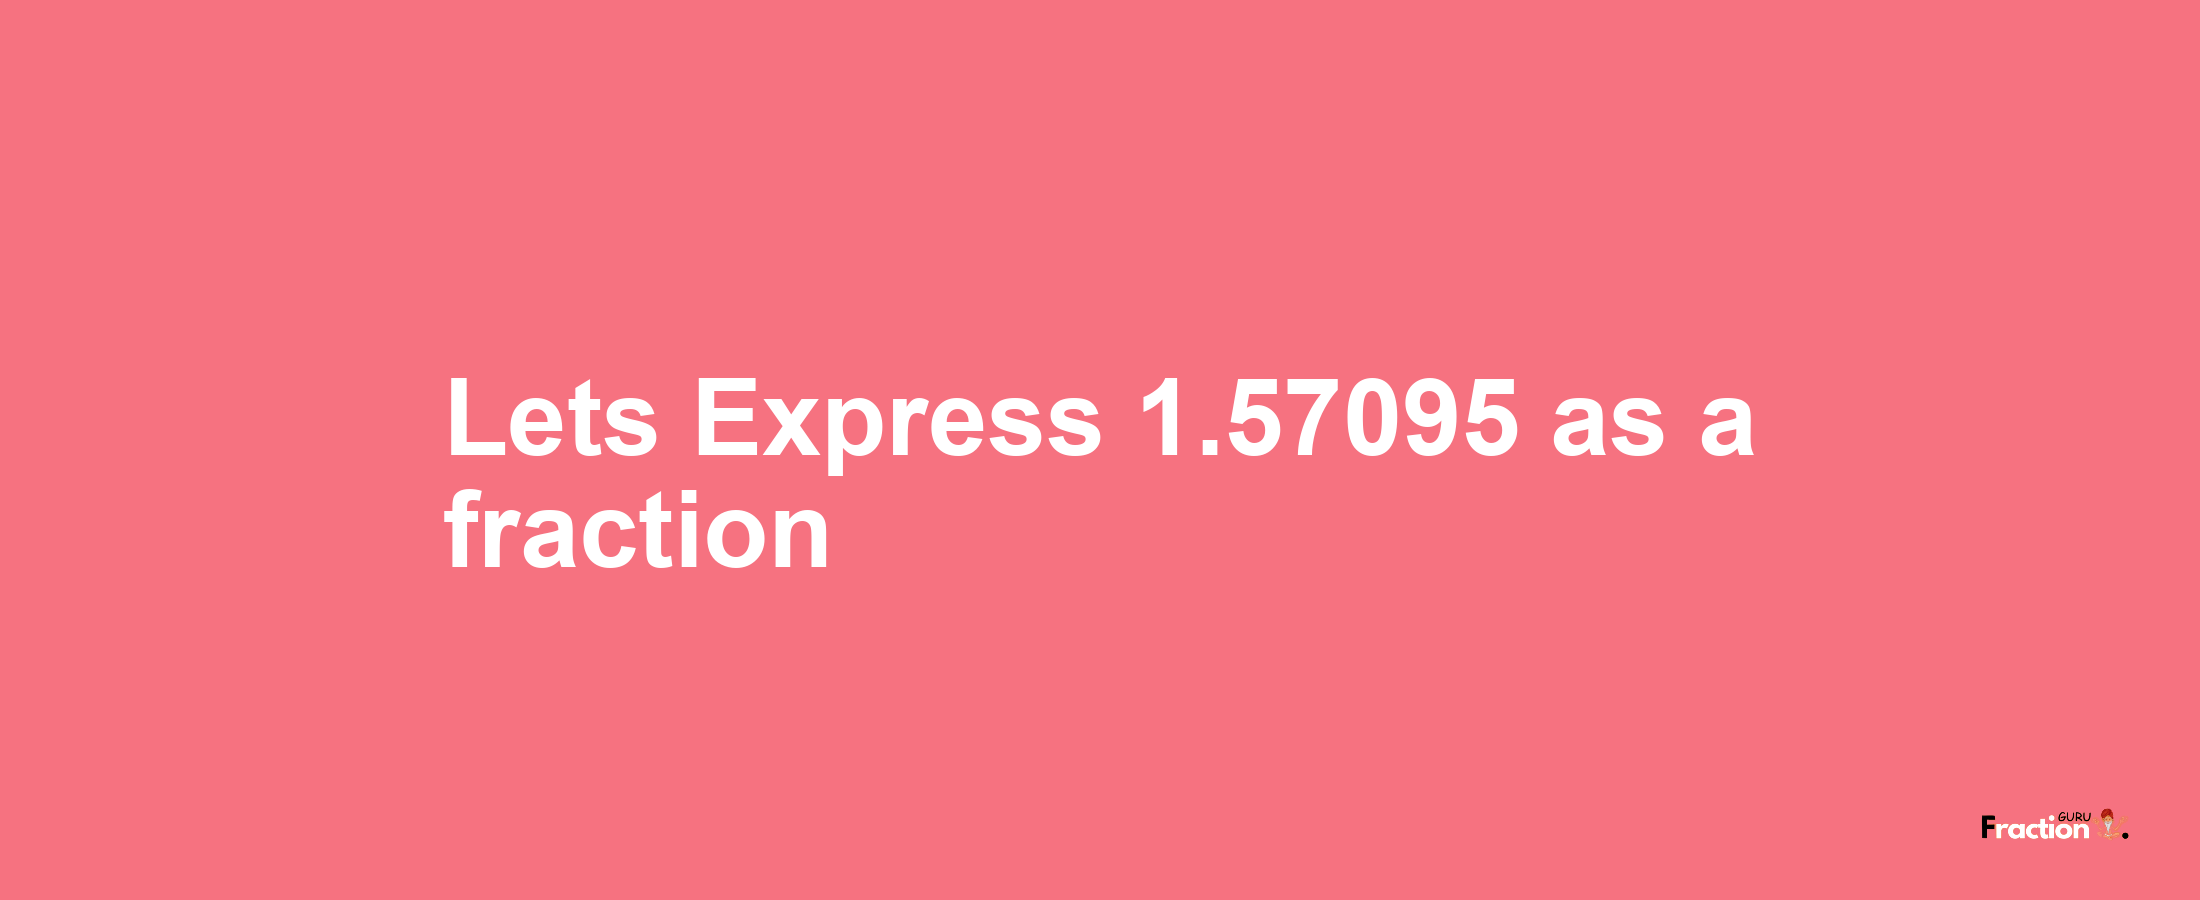 Lets Express 1.57095 as afraction